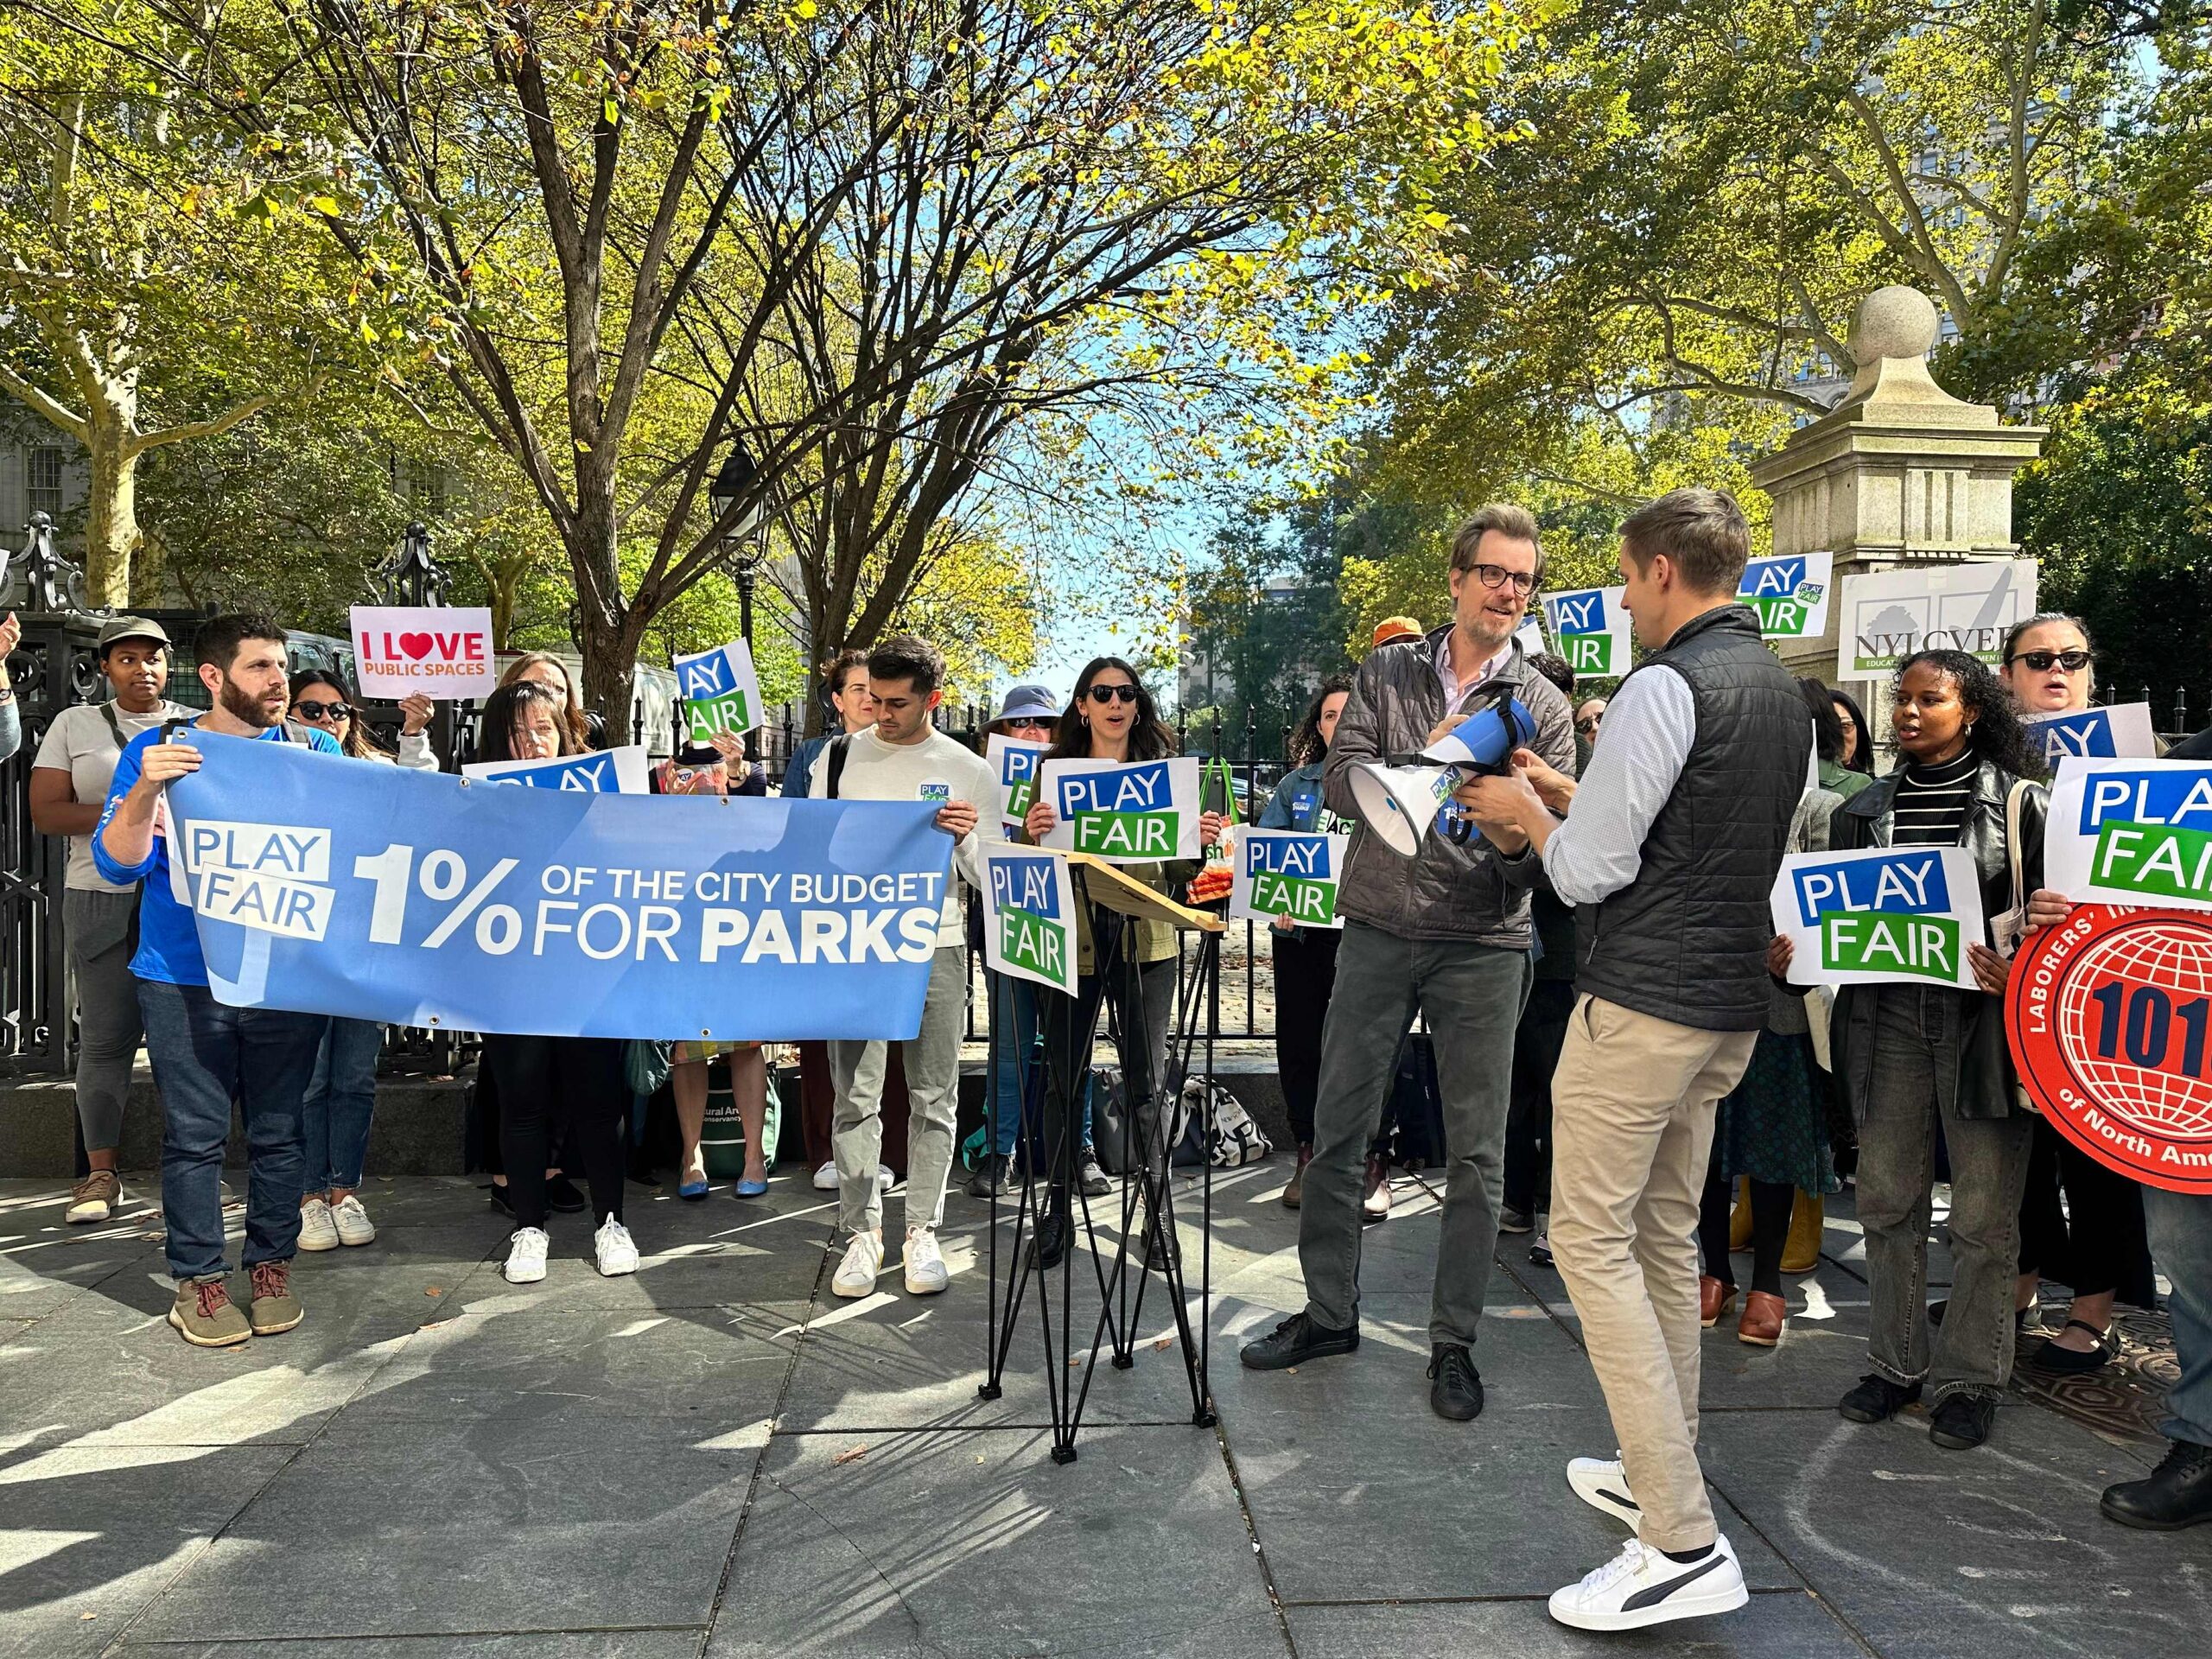 Executive Director of New Yorkers for Parks, Adam Ganser, hands megaphone to council member at a rally in front of City Hall Park.